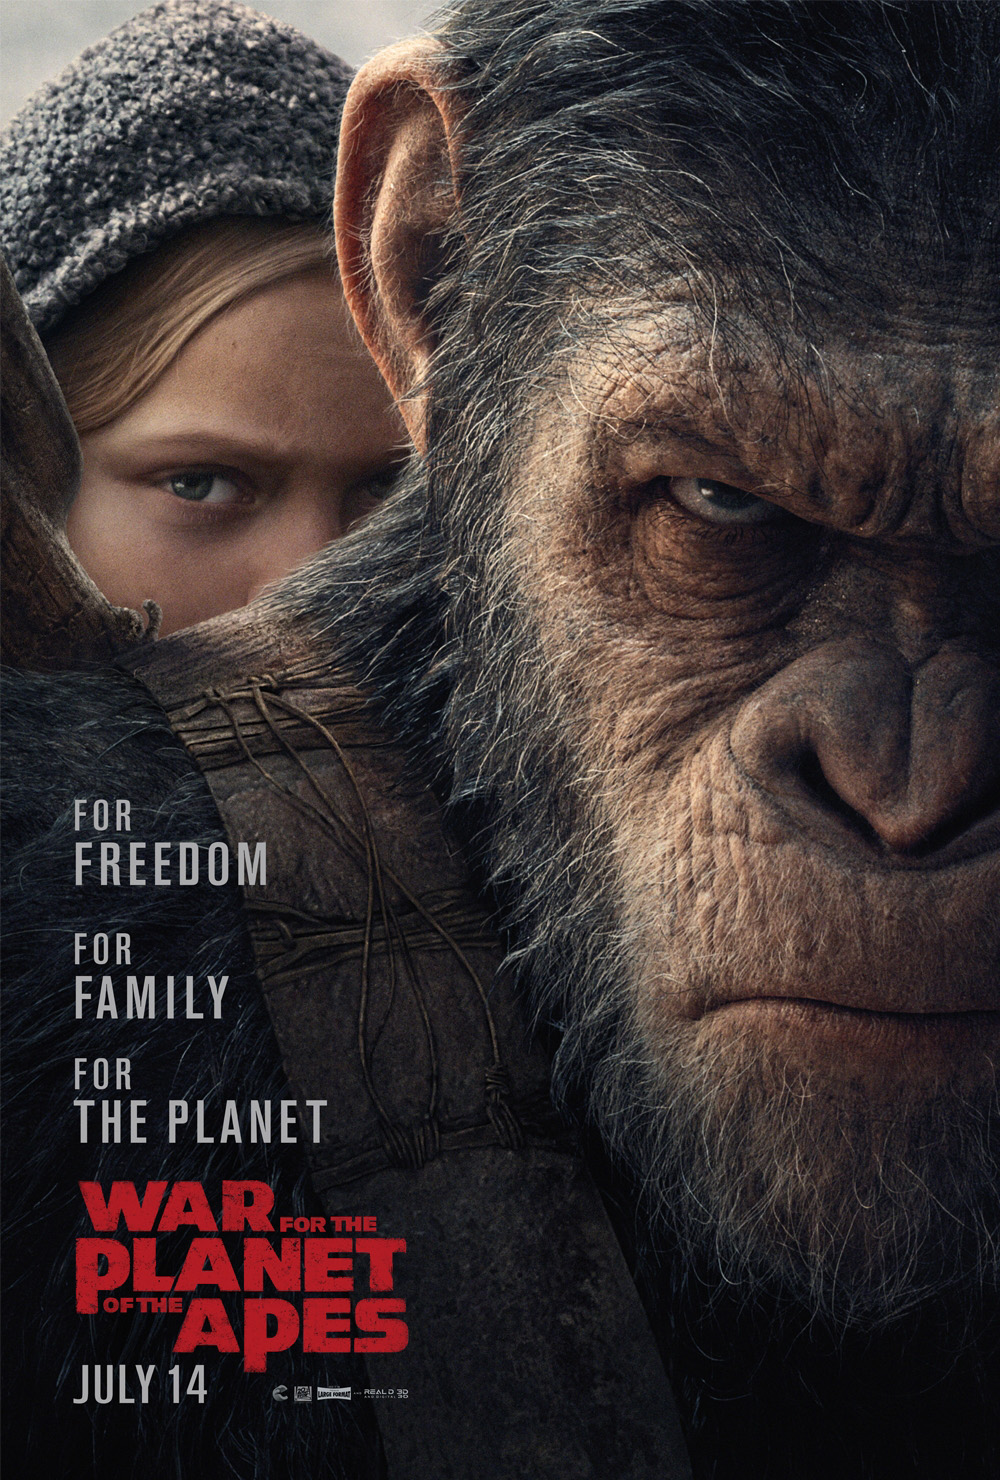 "War for the Planet of the Apes" movie poster. Courtesy of 20th Century Fox. Source: https://www.imdb.com/title/tt3450958/mediaviewer/rm415931393/